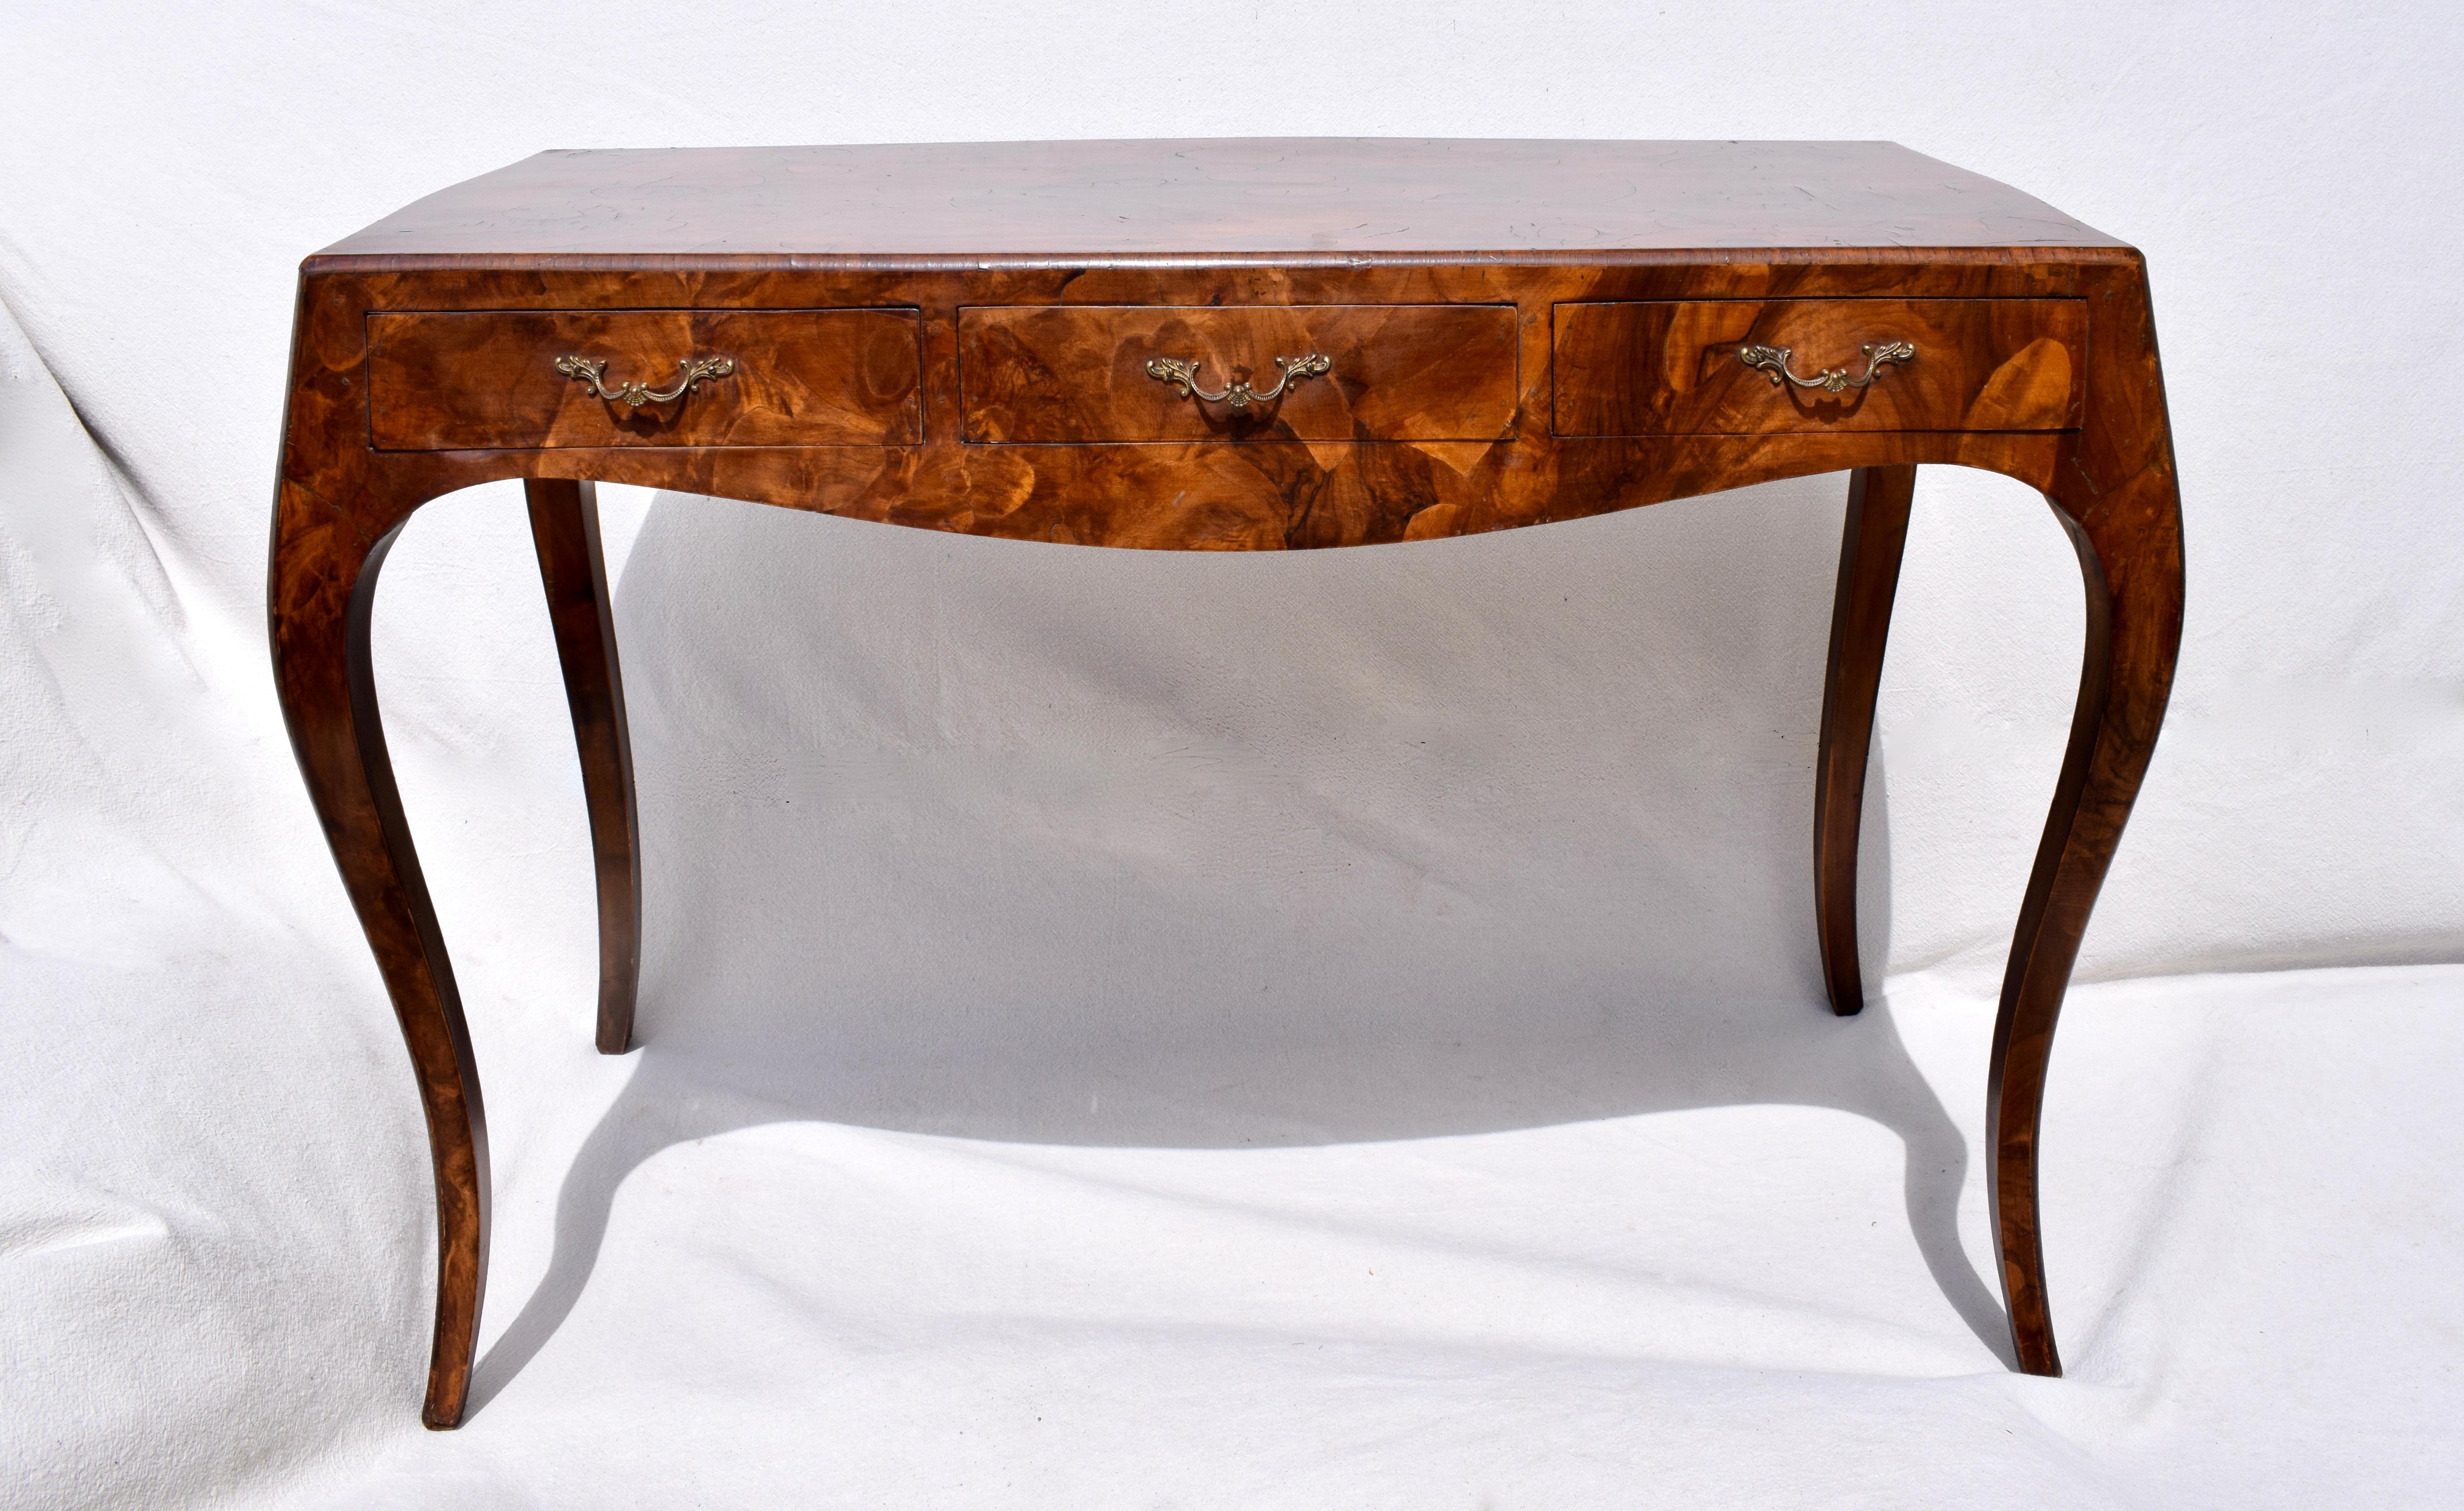 Italian Baroque style oyster burl wood console table with cabriole legs, bombe sides and three drawers. We have intentionally photographed in a variety of natural light settings from clouds to bright sunshine to portray striking variations of the